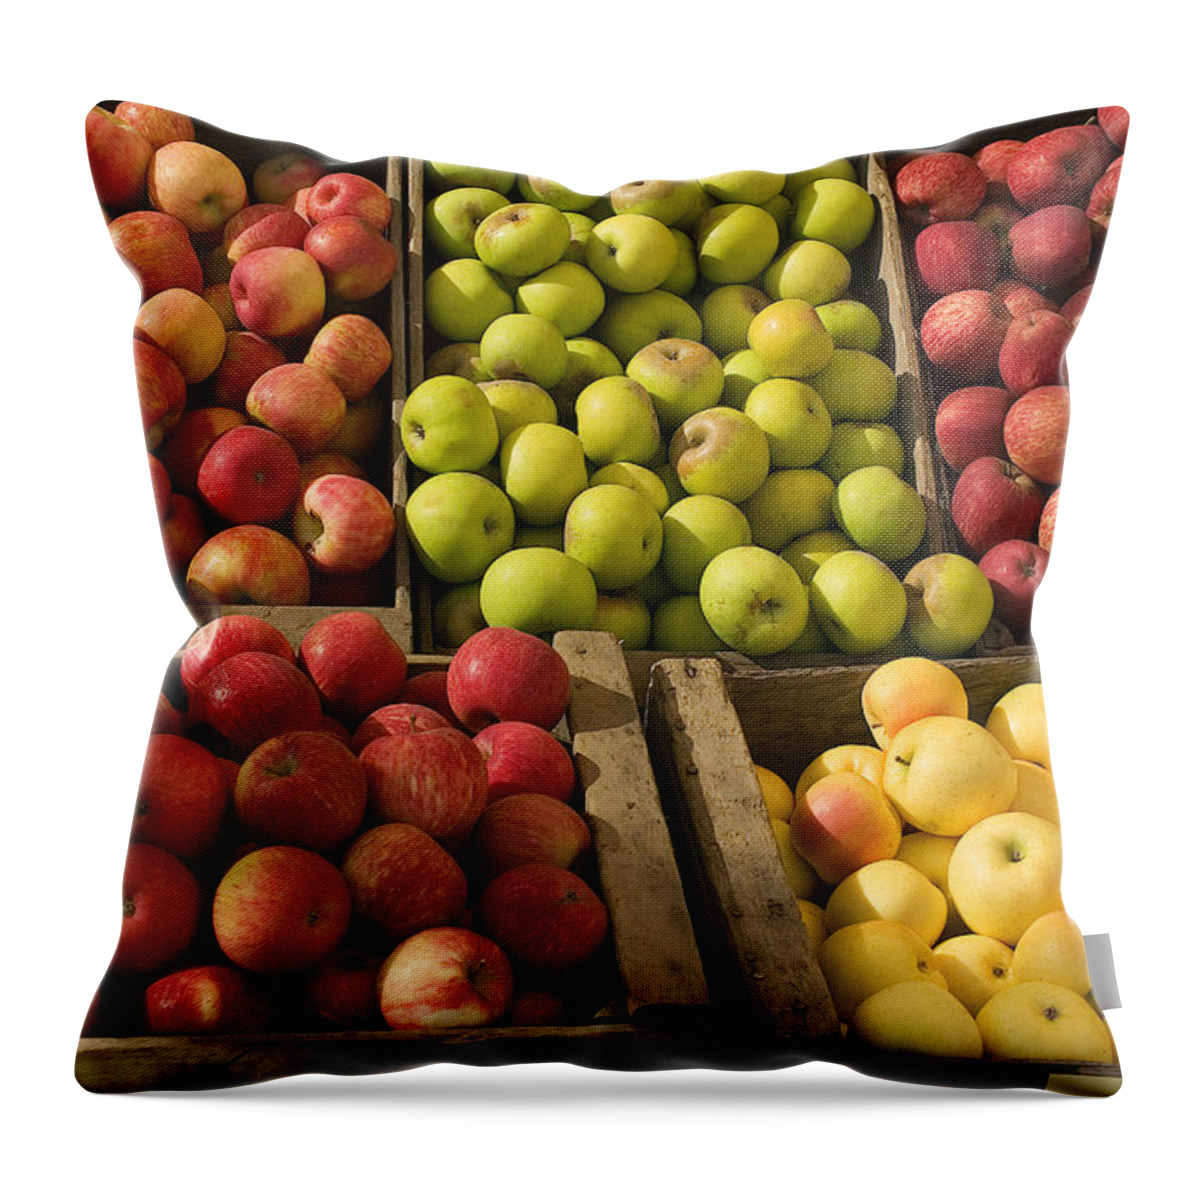 Apple Throw Pillow featuring the photograph Apple Harvest by Garry Gay